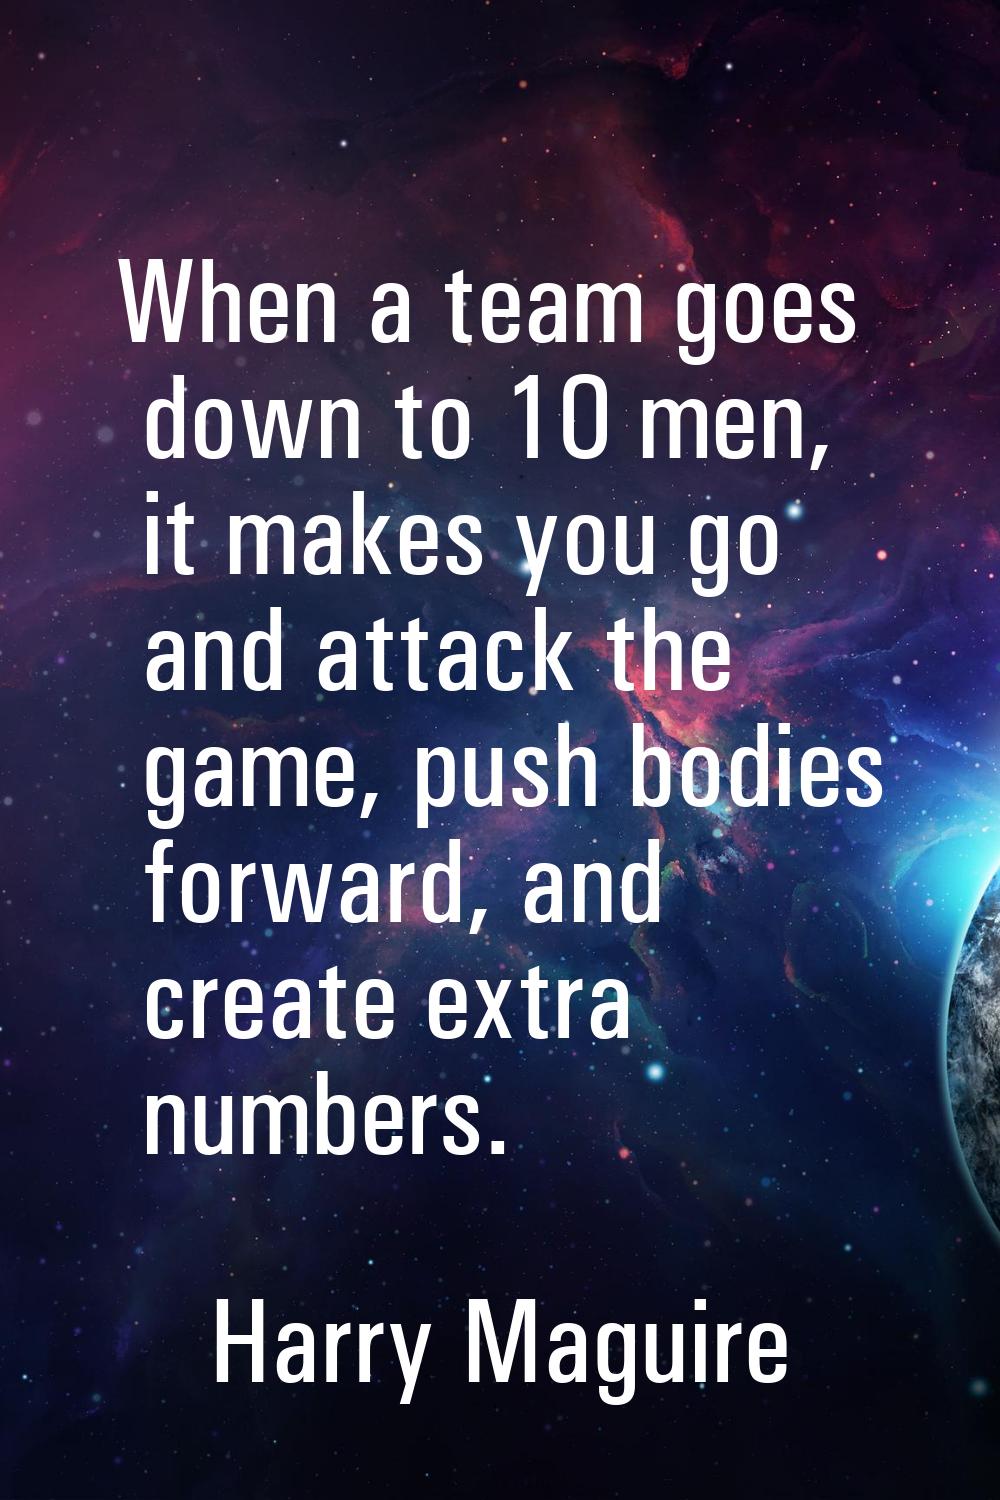 When a team goes down to 10 men, it makes you go and attack the game, push bodies forward, and crea